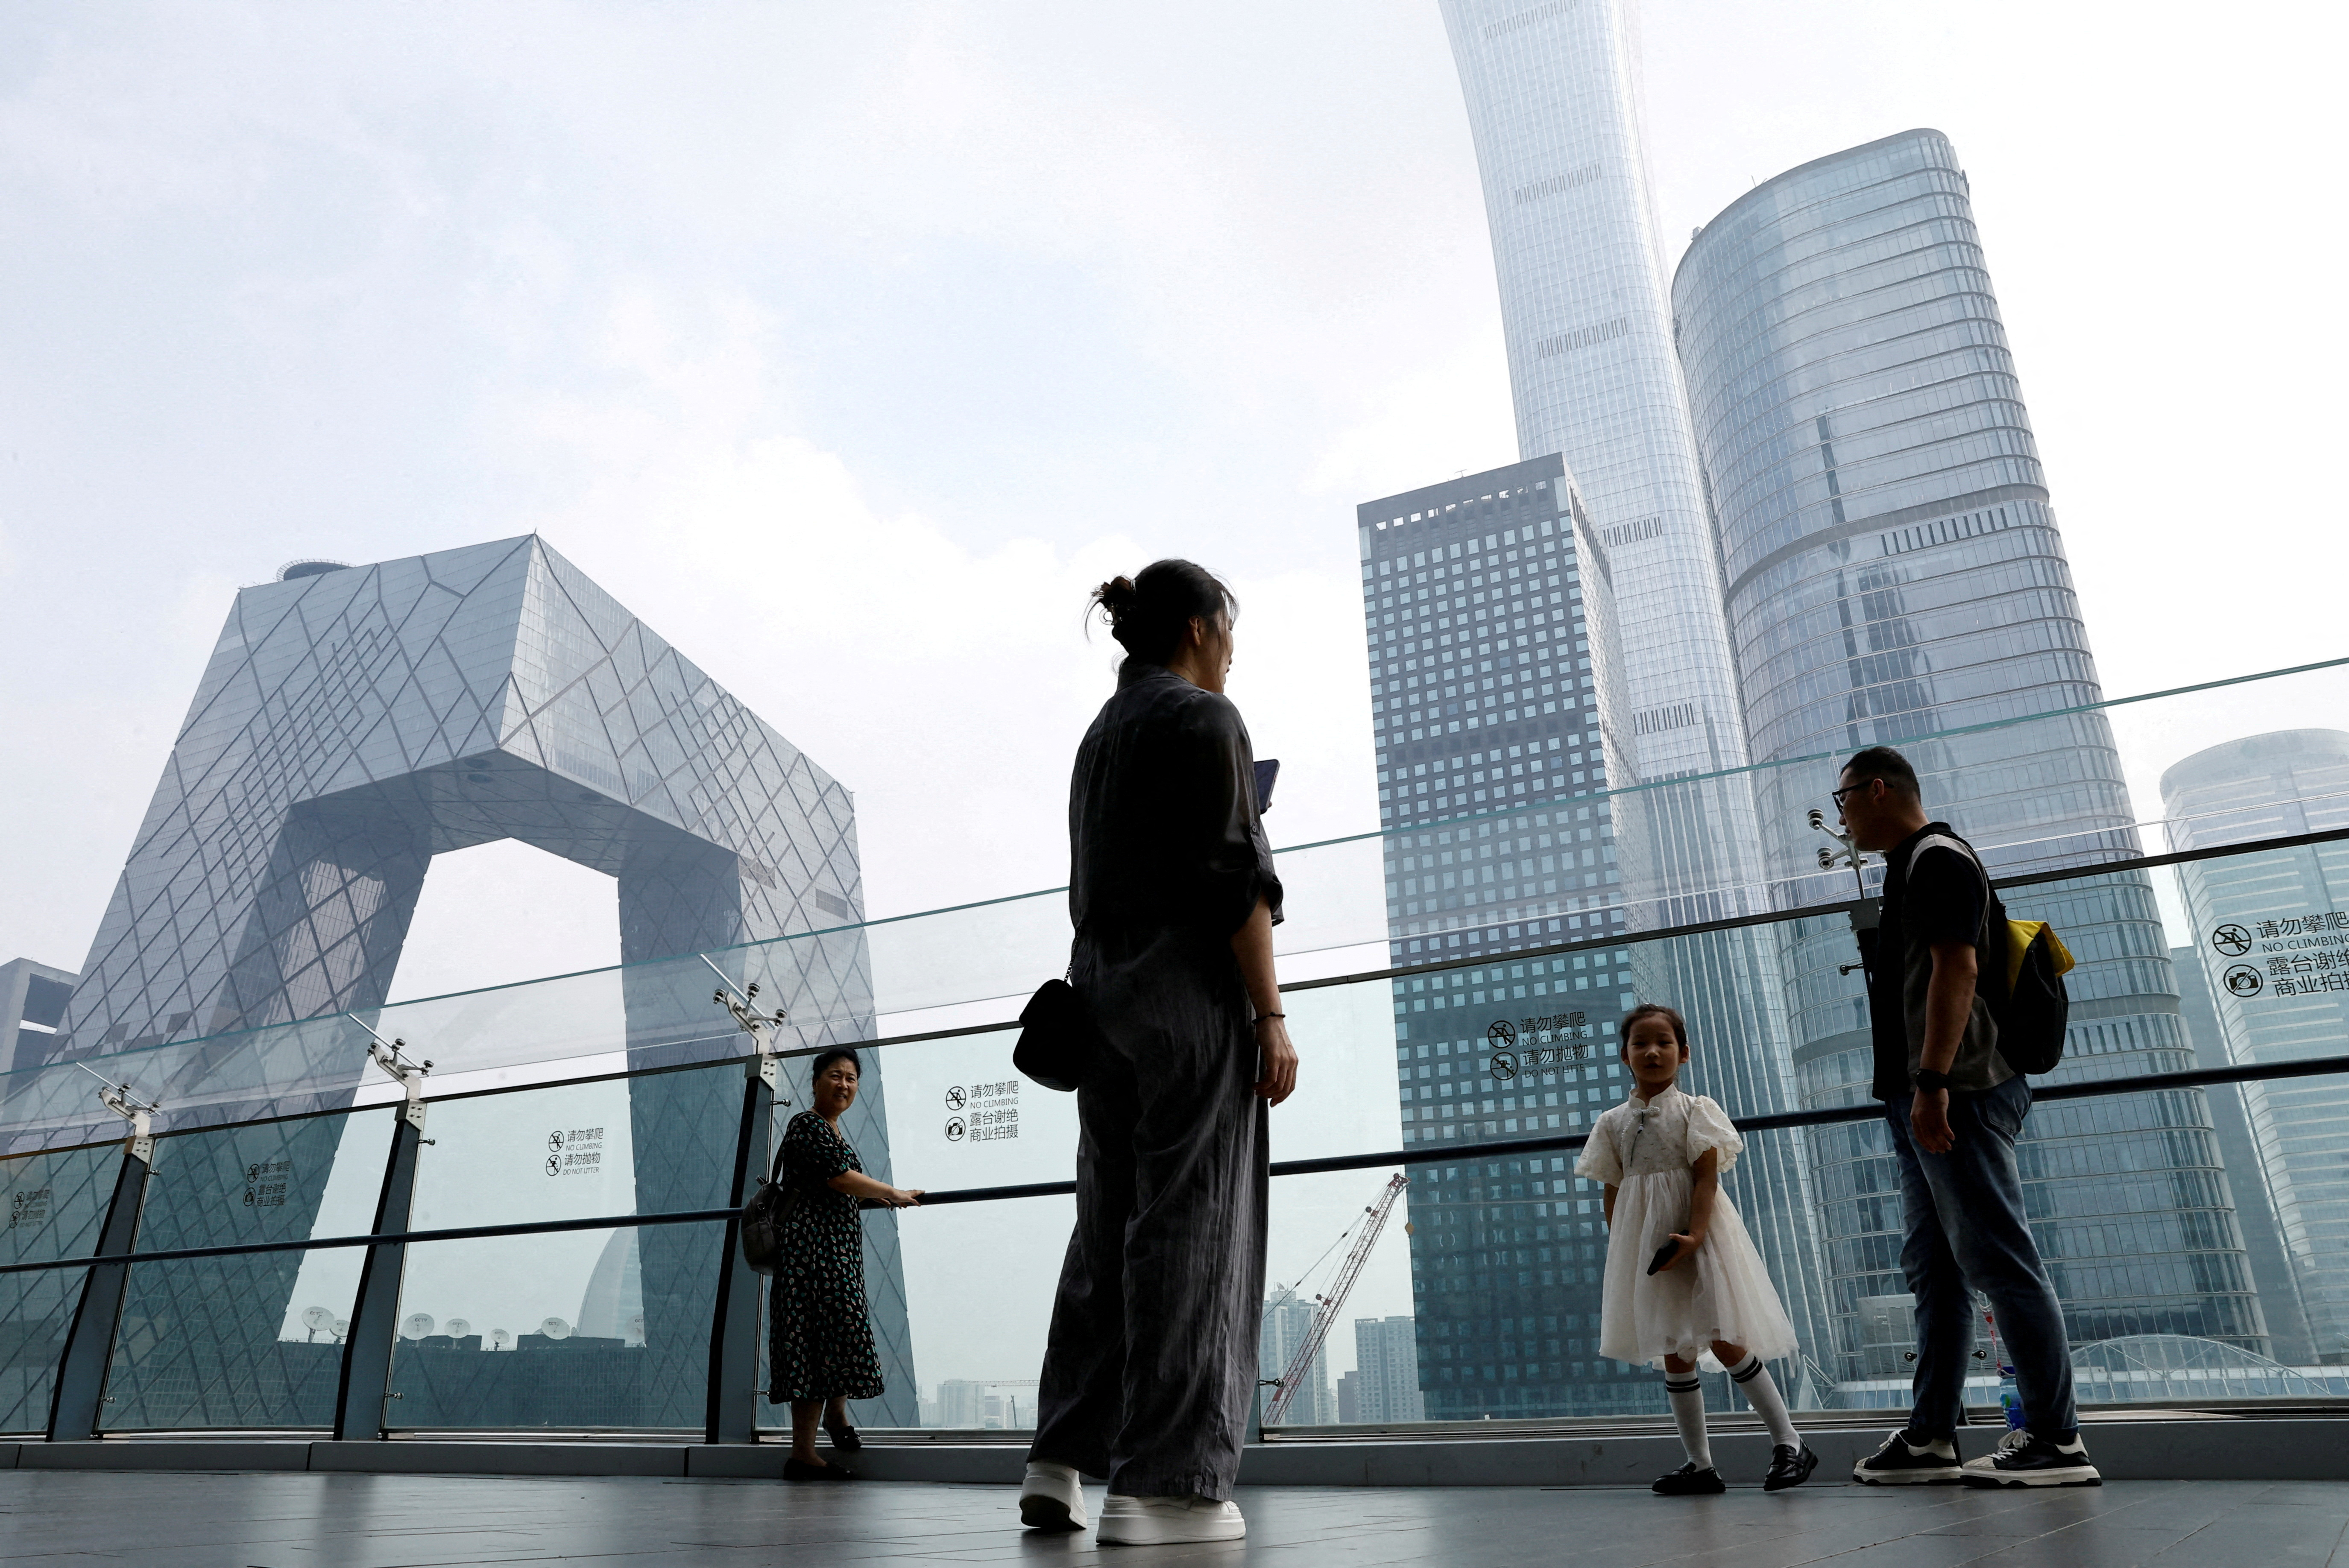 China issues legal guidelines to support private business